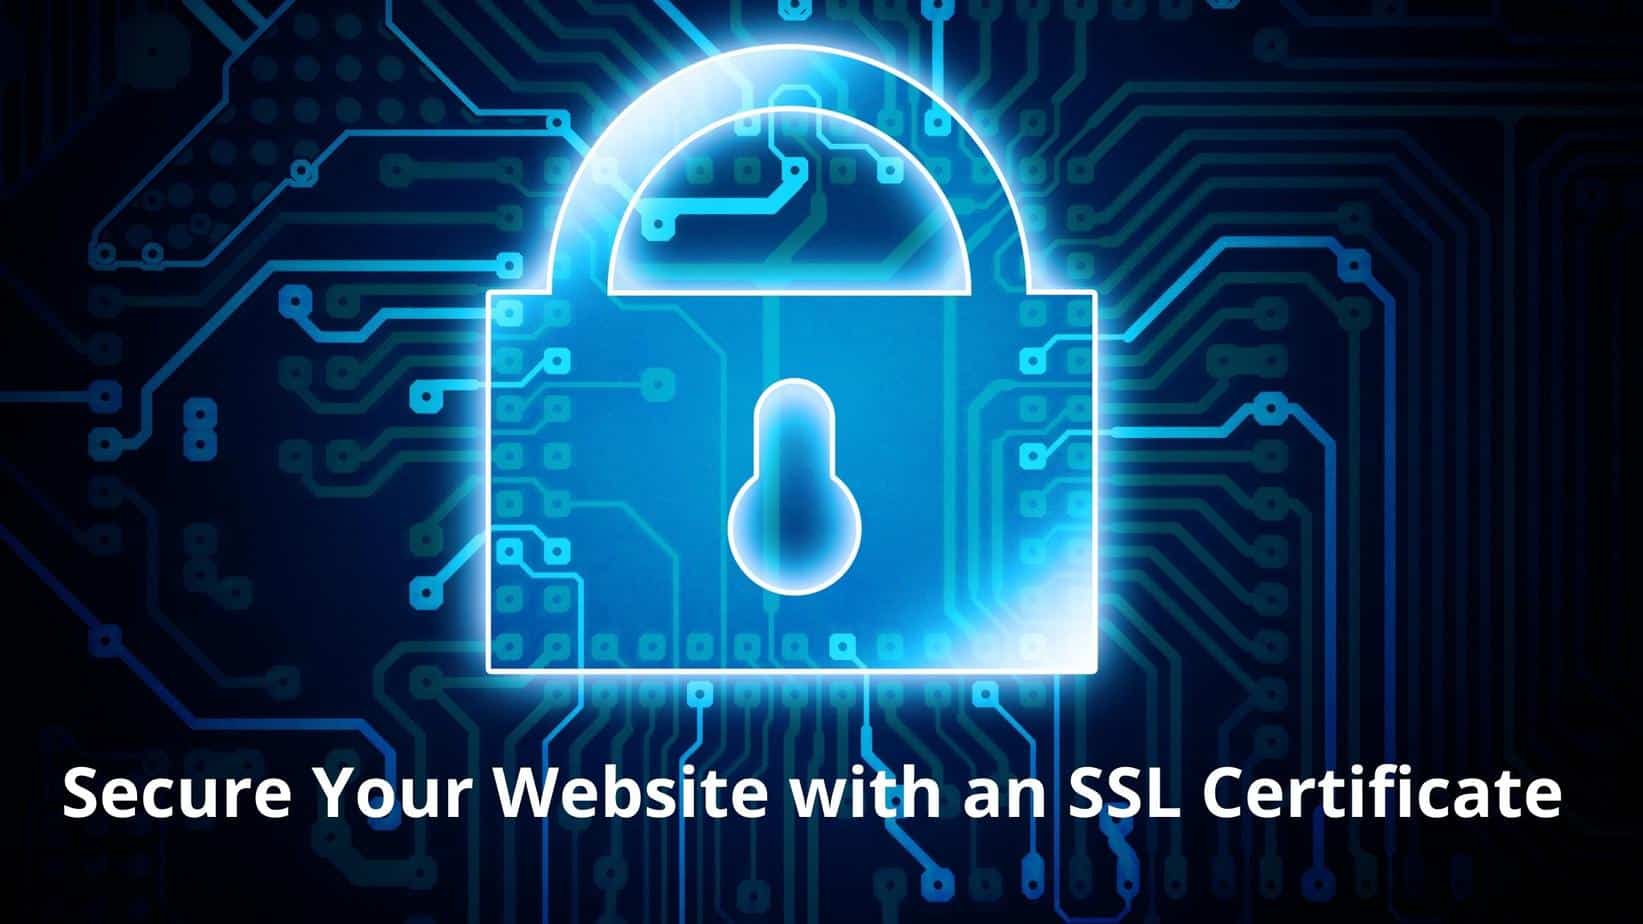 Featured image for “Secure Your Website with an SSL Certificate”